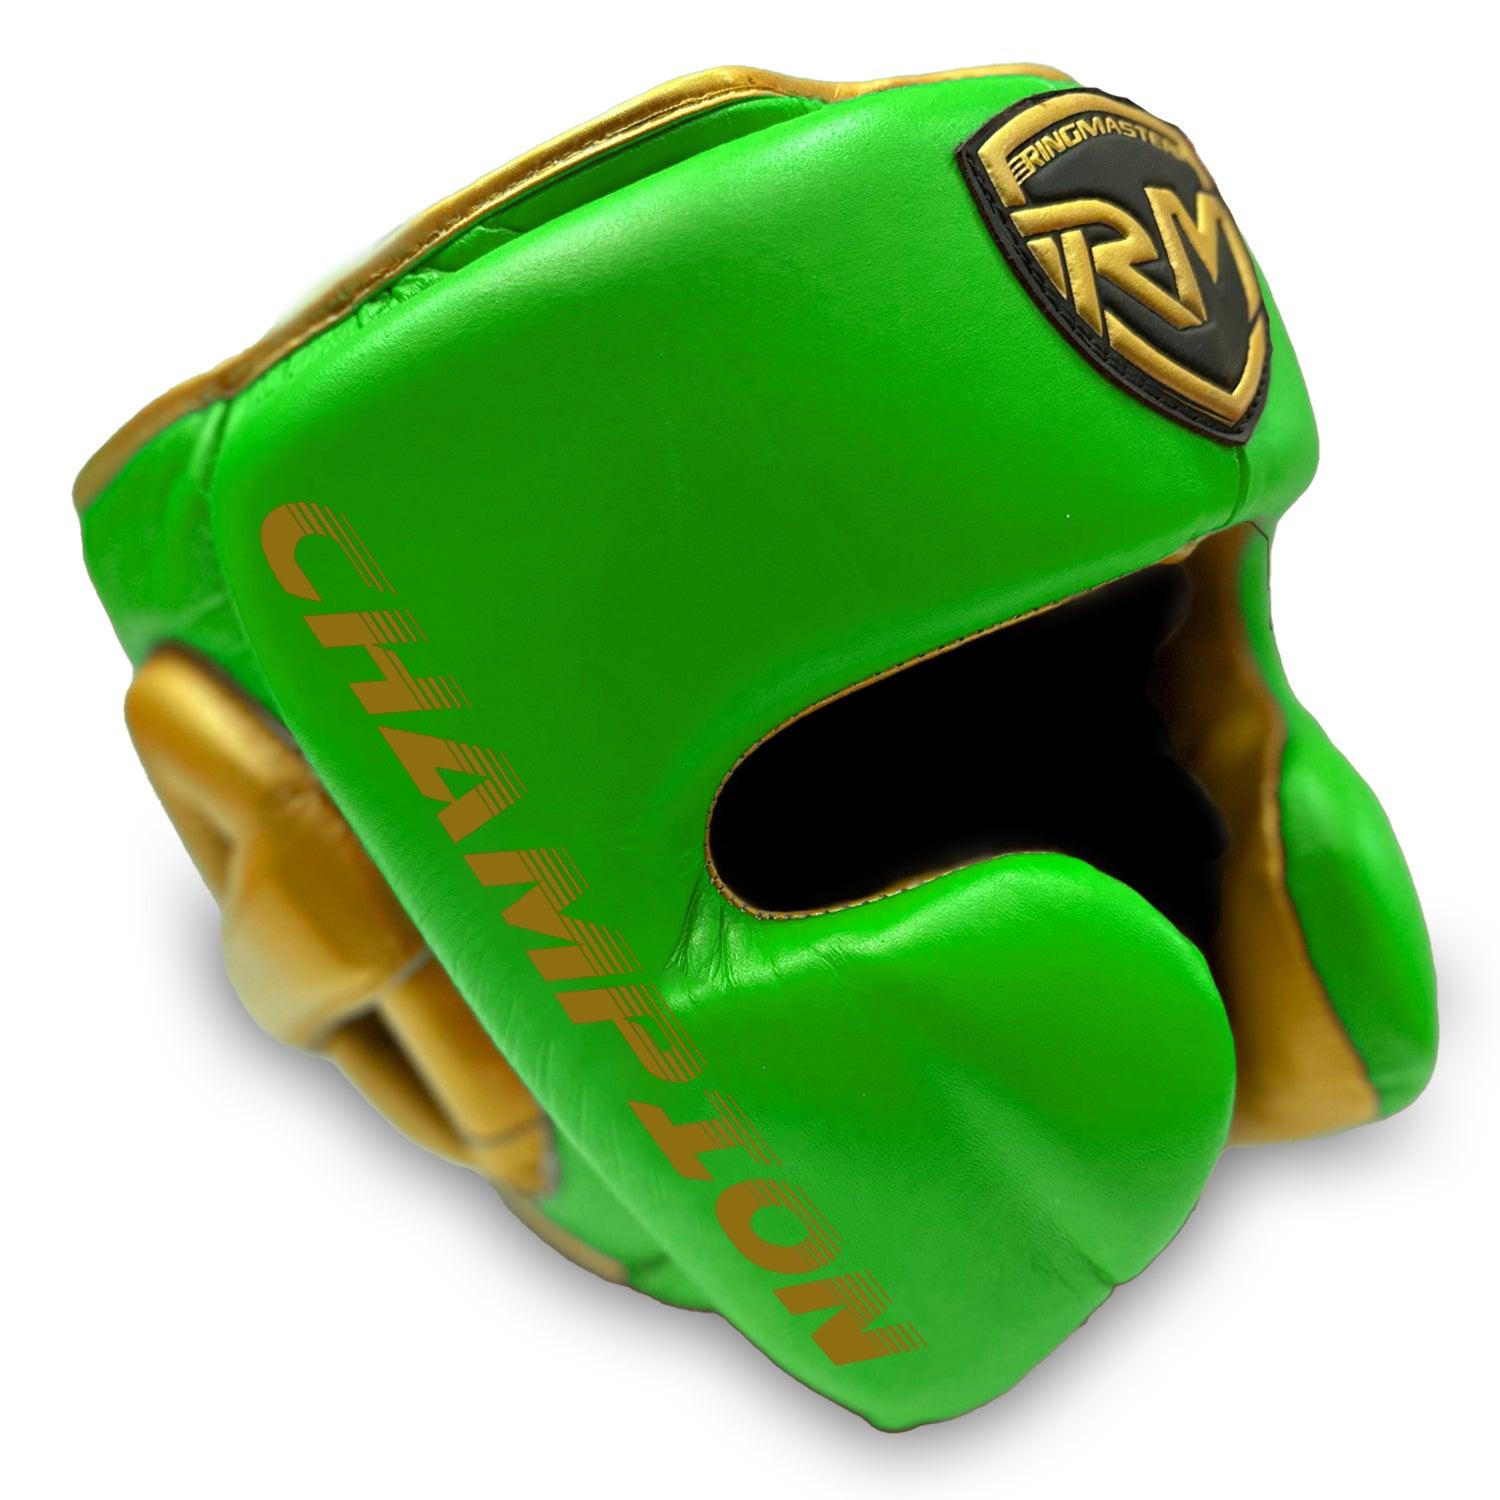 Head guard Boxing, Best boxing head guard, boxing head guard uk, boxing head guard junior, boxing head guard kids, boxing head guard open face, Boxing head guard for sale, face guard boxing, boxing headgear, chin cheek head guard,  Head guard Boxing Green and Gold, Ringmaster Sports Head guard, Ringmaster Sports Equipment, Ringmaster boxing Equipment